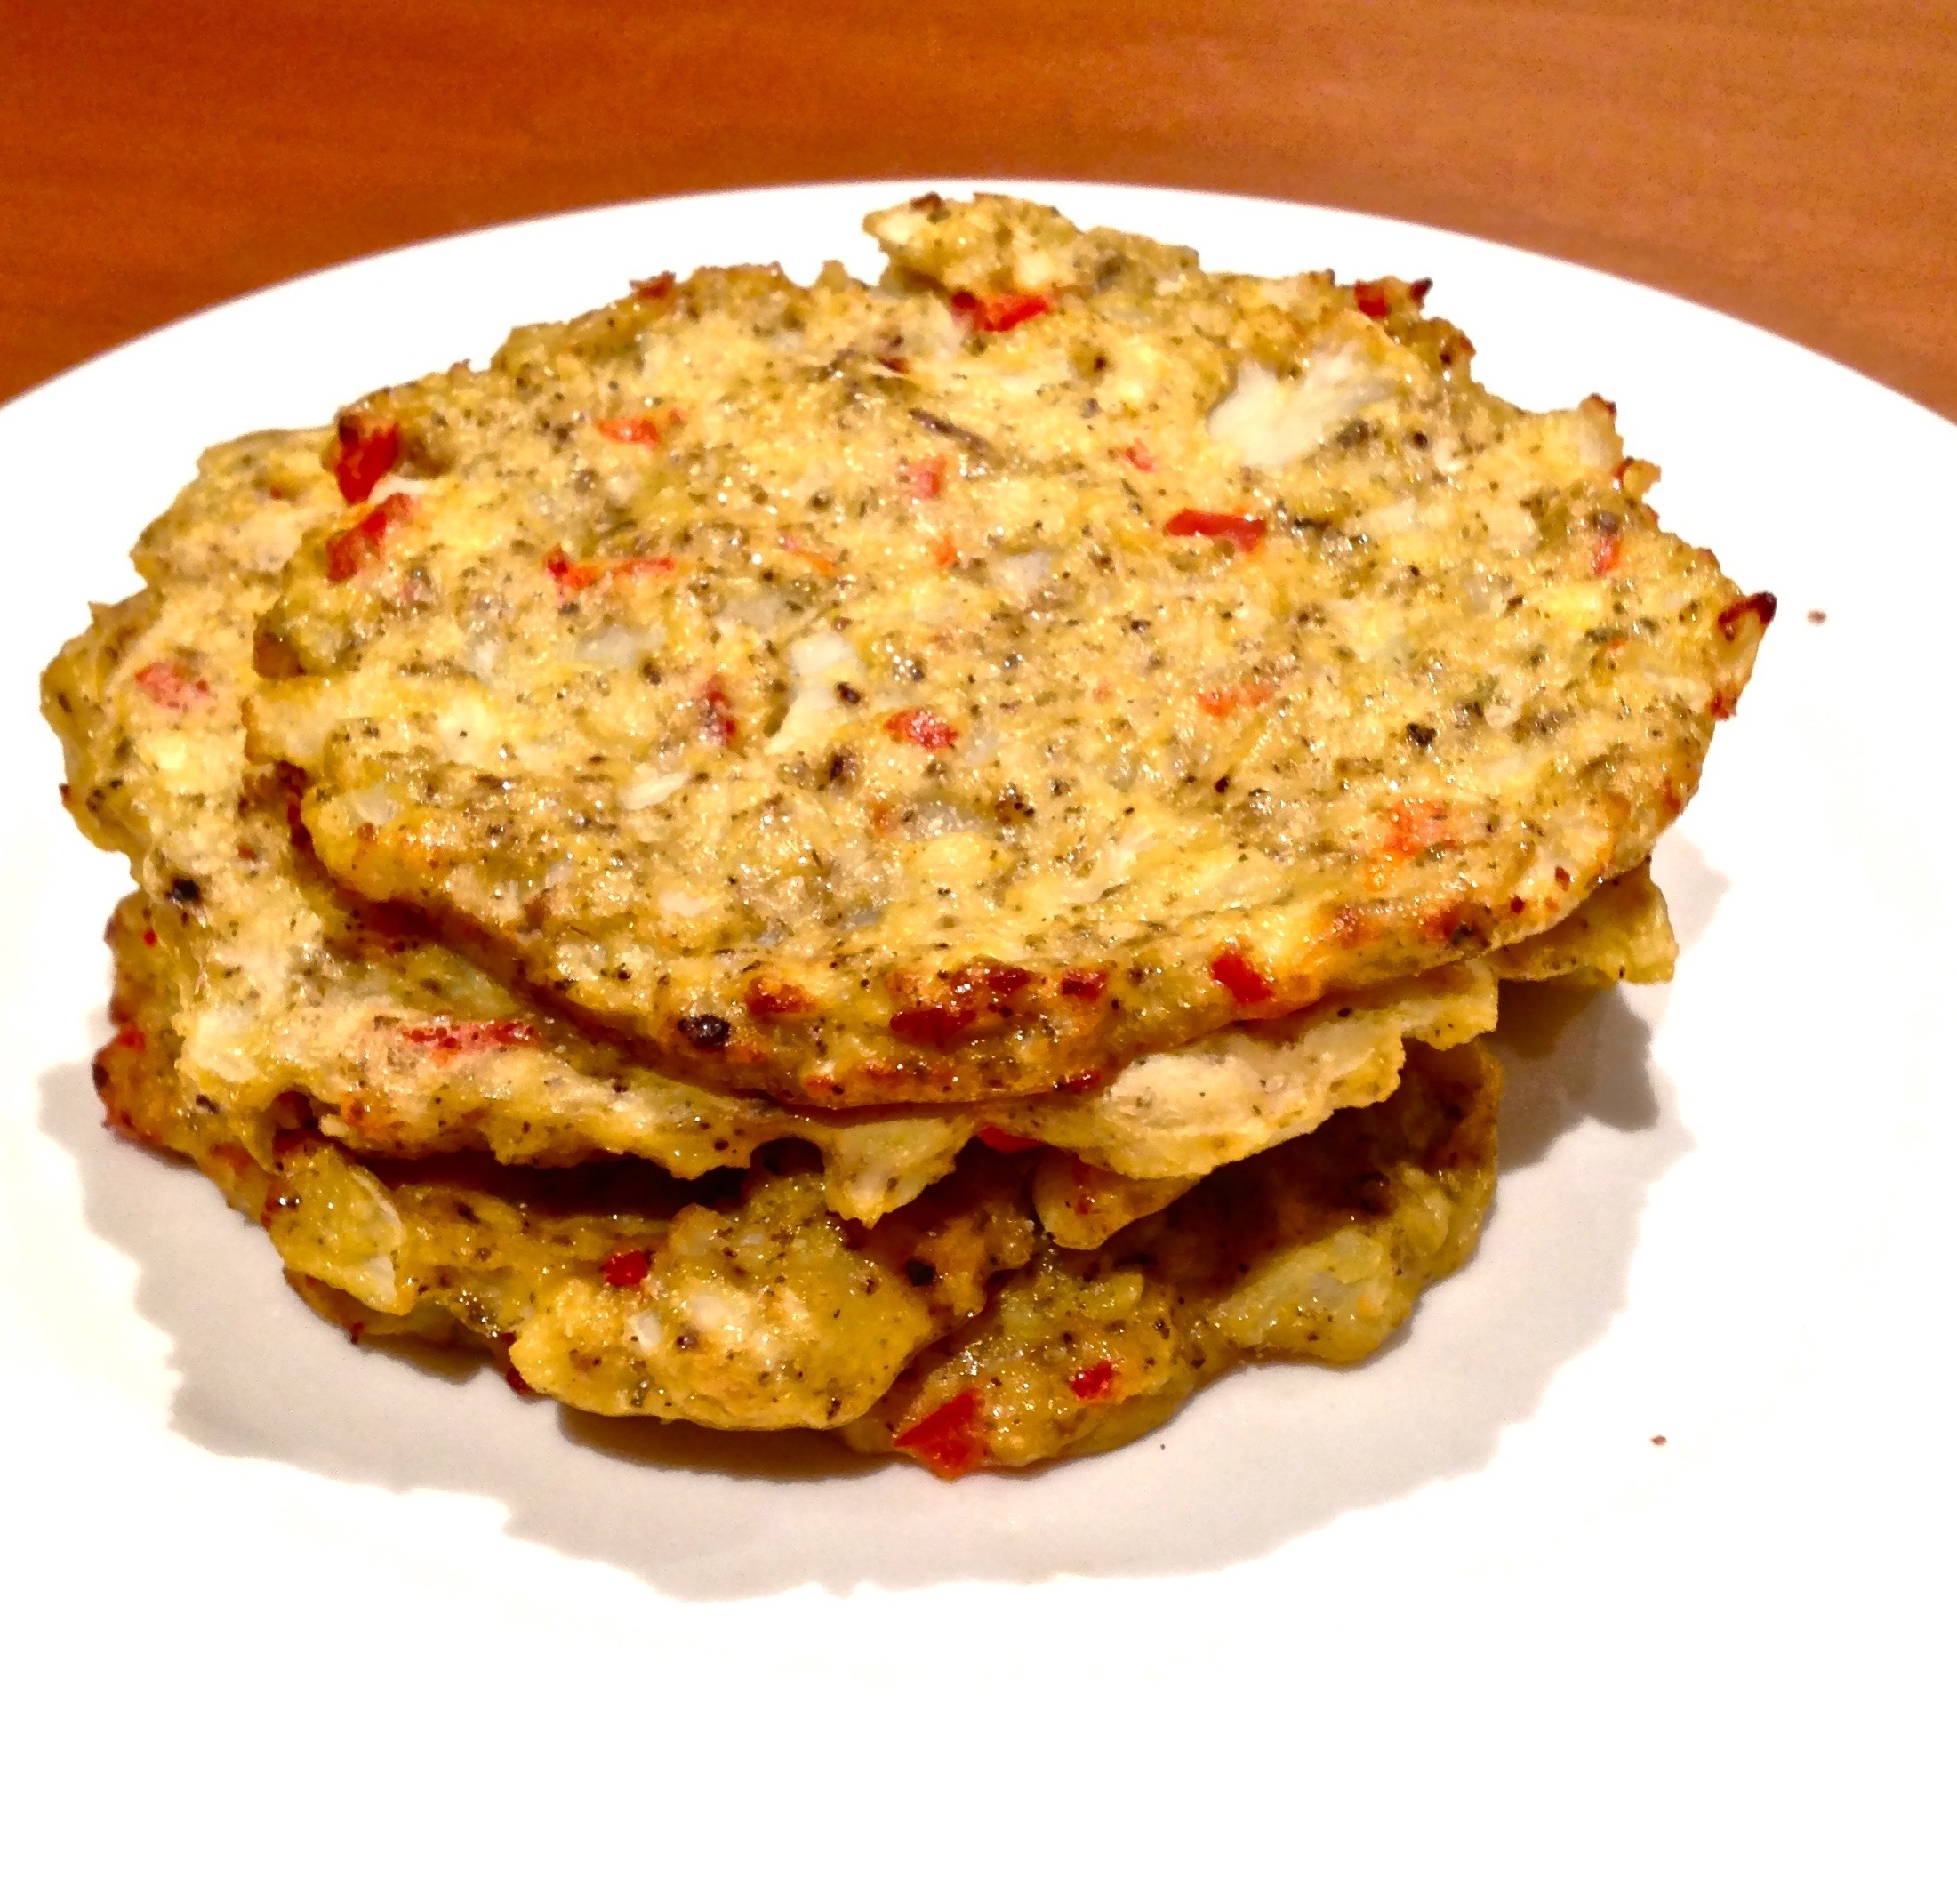 Best Food For Weight Loss: Spicy Cauliflower Tortillas, Low Carb, Gluten Free